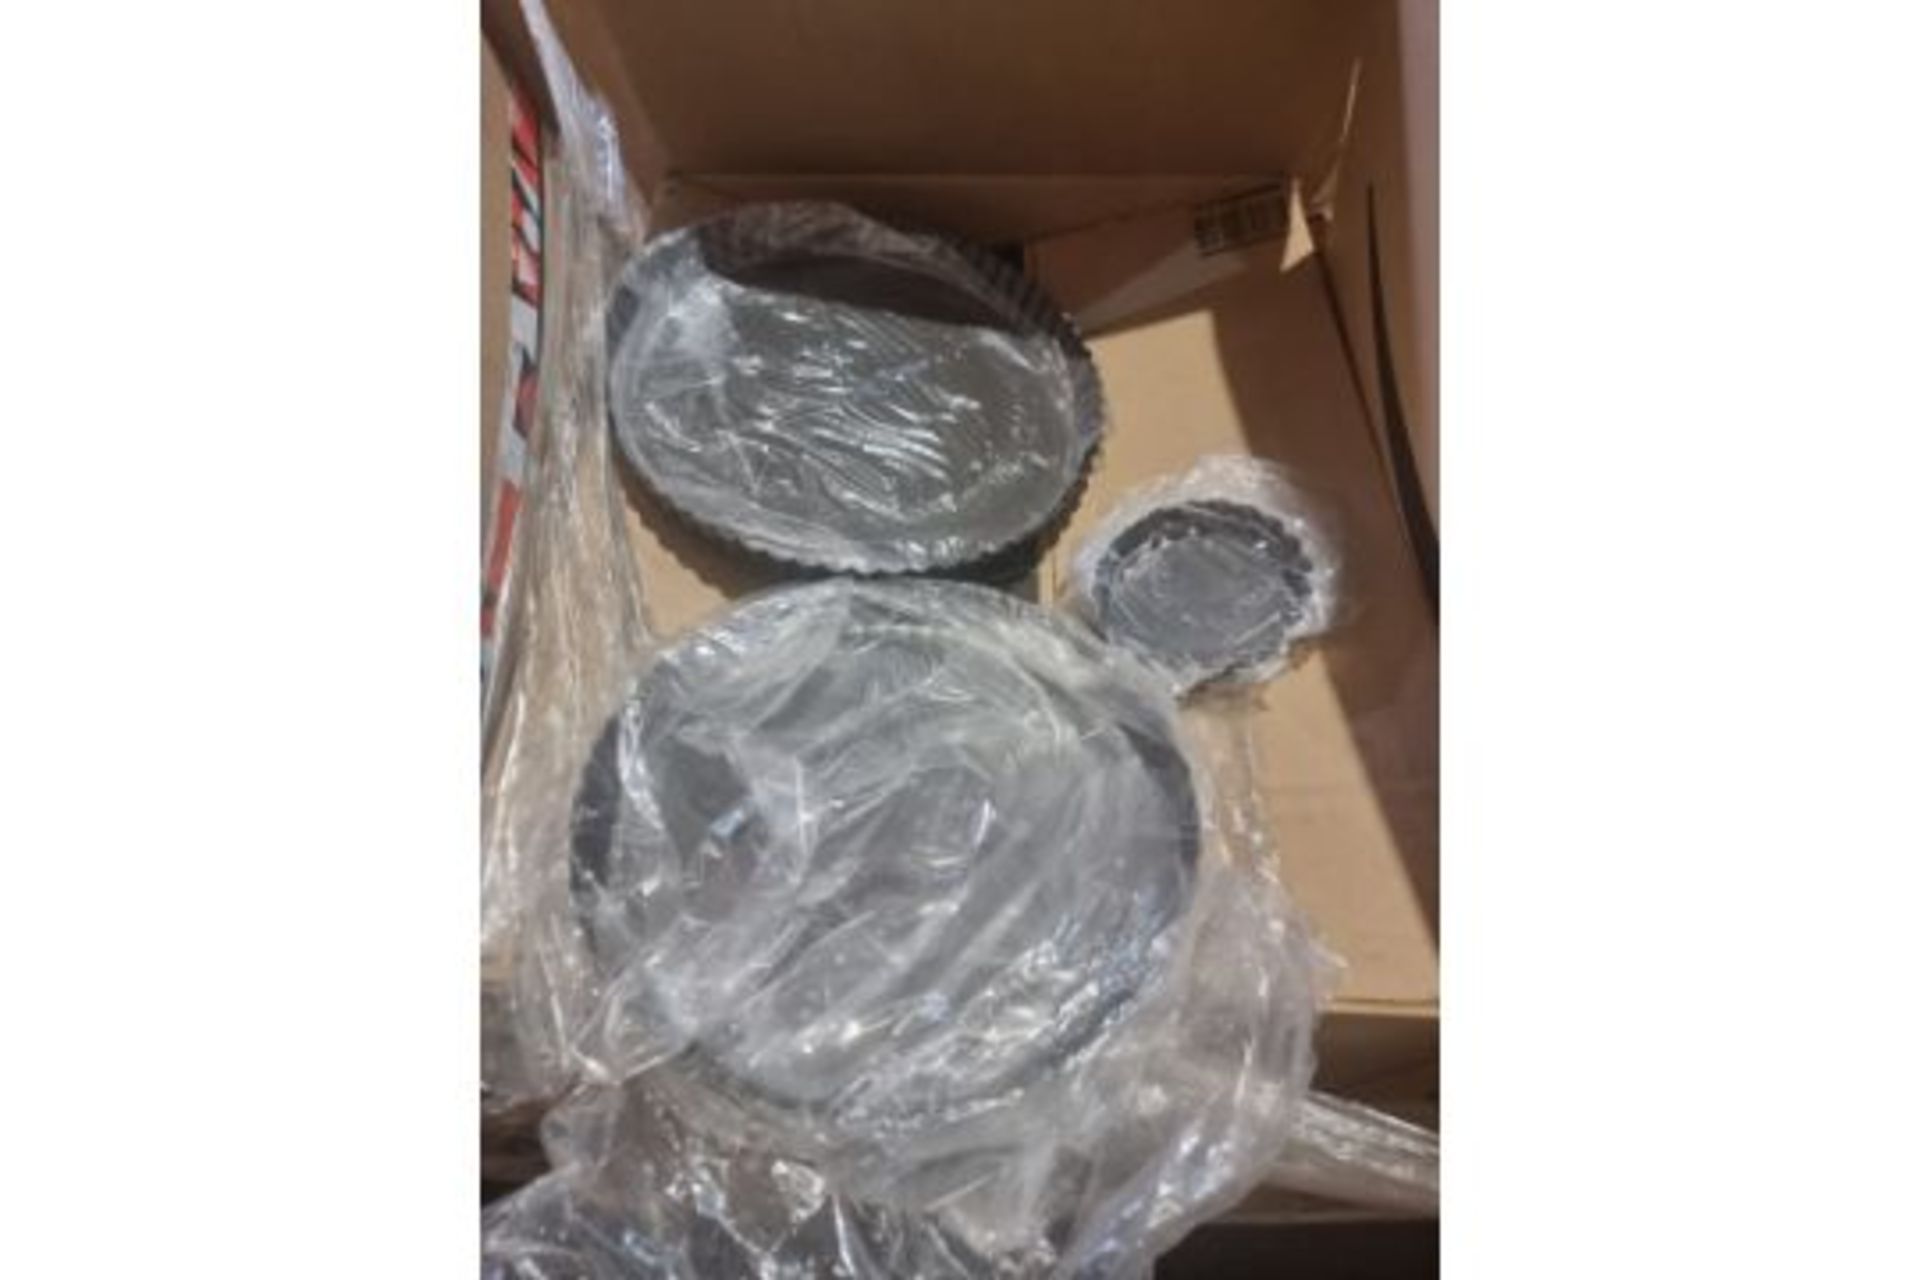 TRADE LOT TO CONTAIN 100 x MIXED BRAND NEW AMAZON OVERSTOCK ITEMS. ITEMS ARE PICKED RANDOMLY FROM - Image 18 of 29